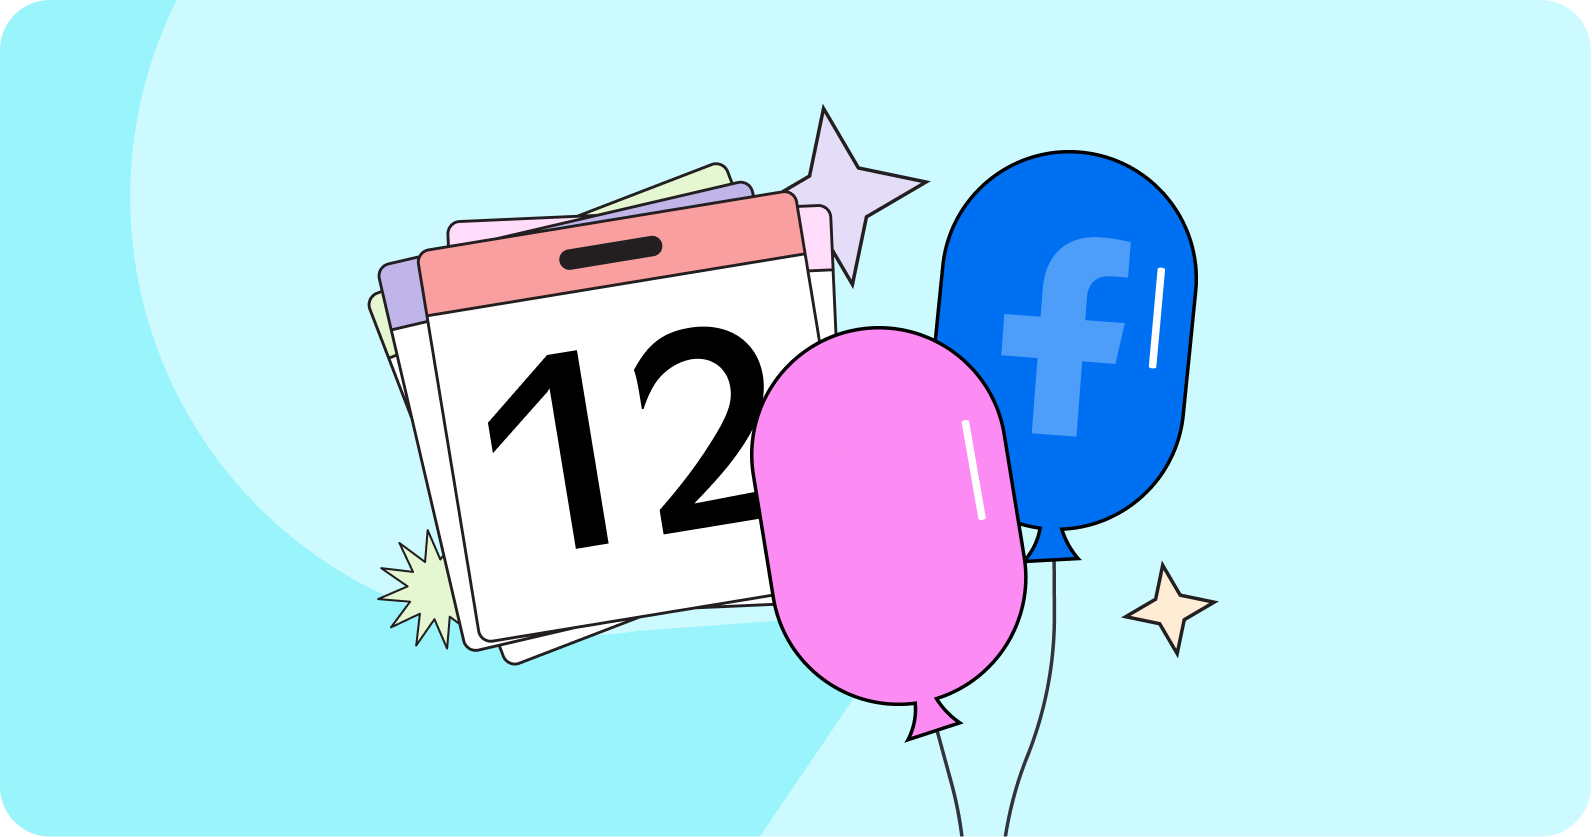 Illustration of a calendar and balloons.